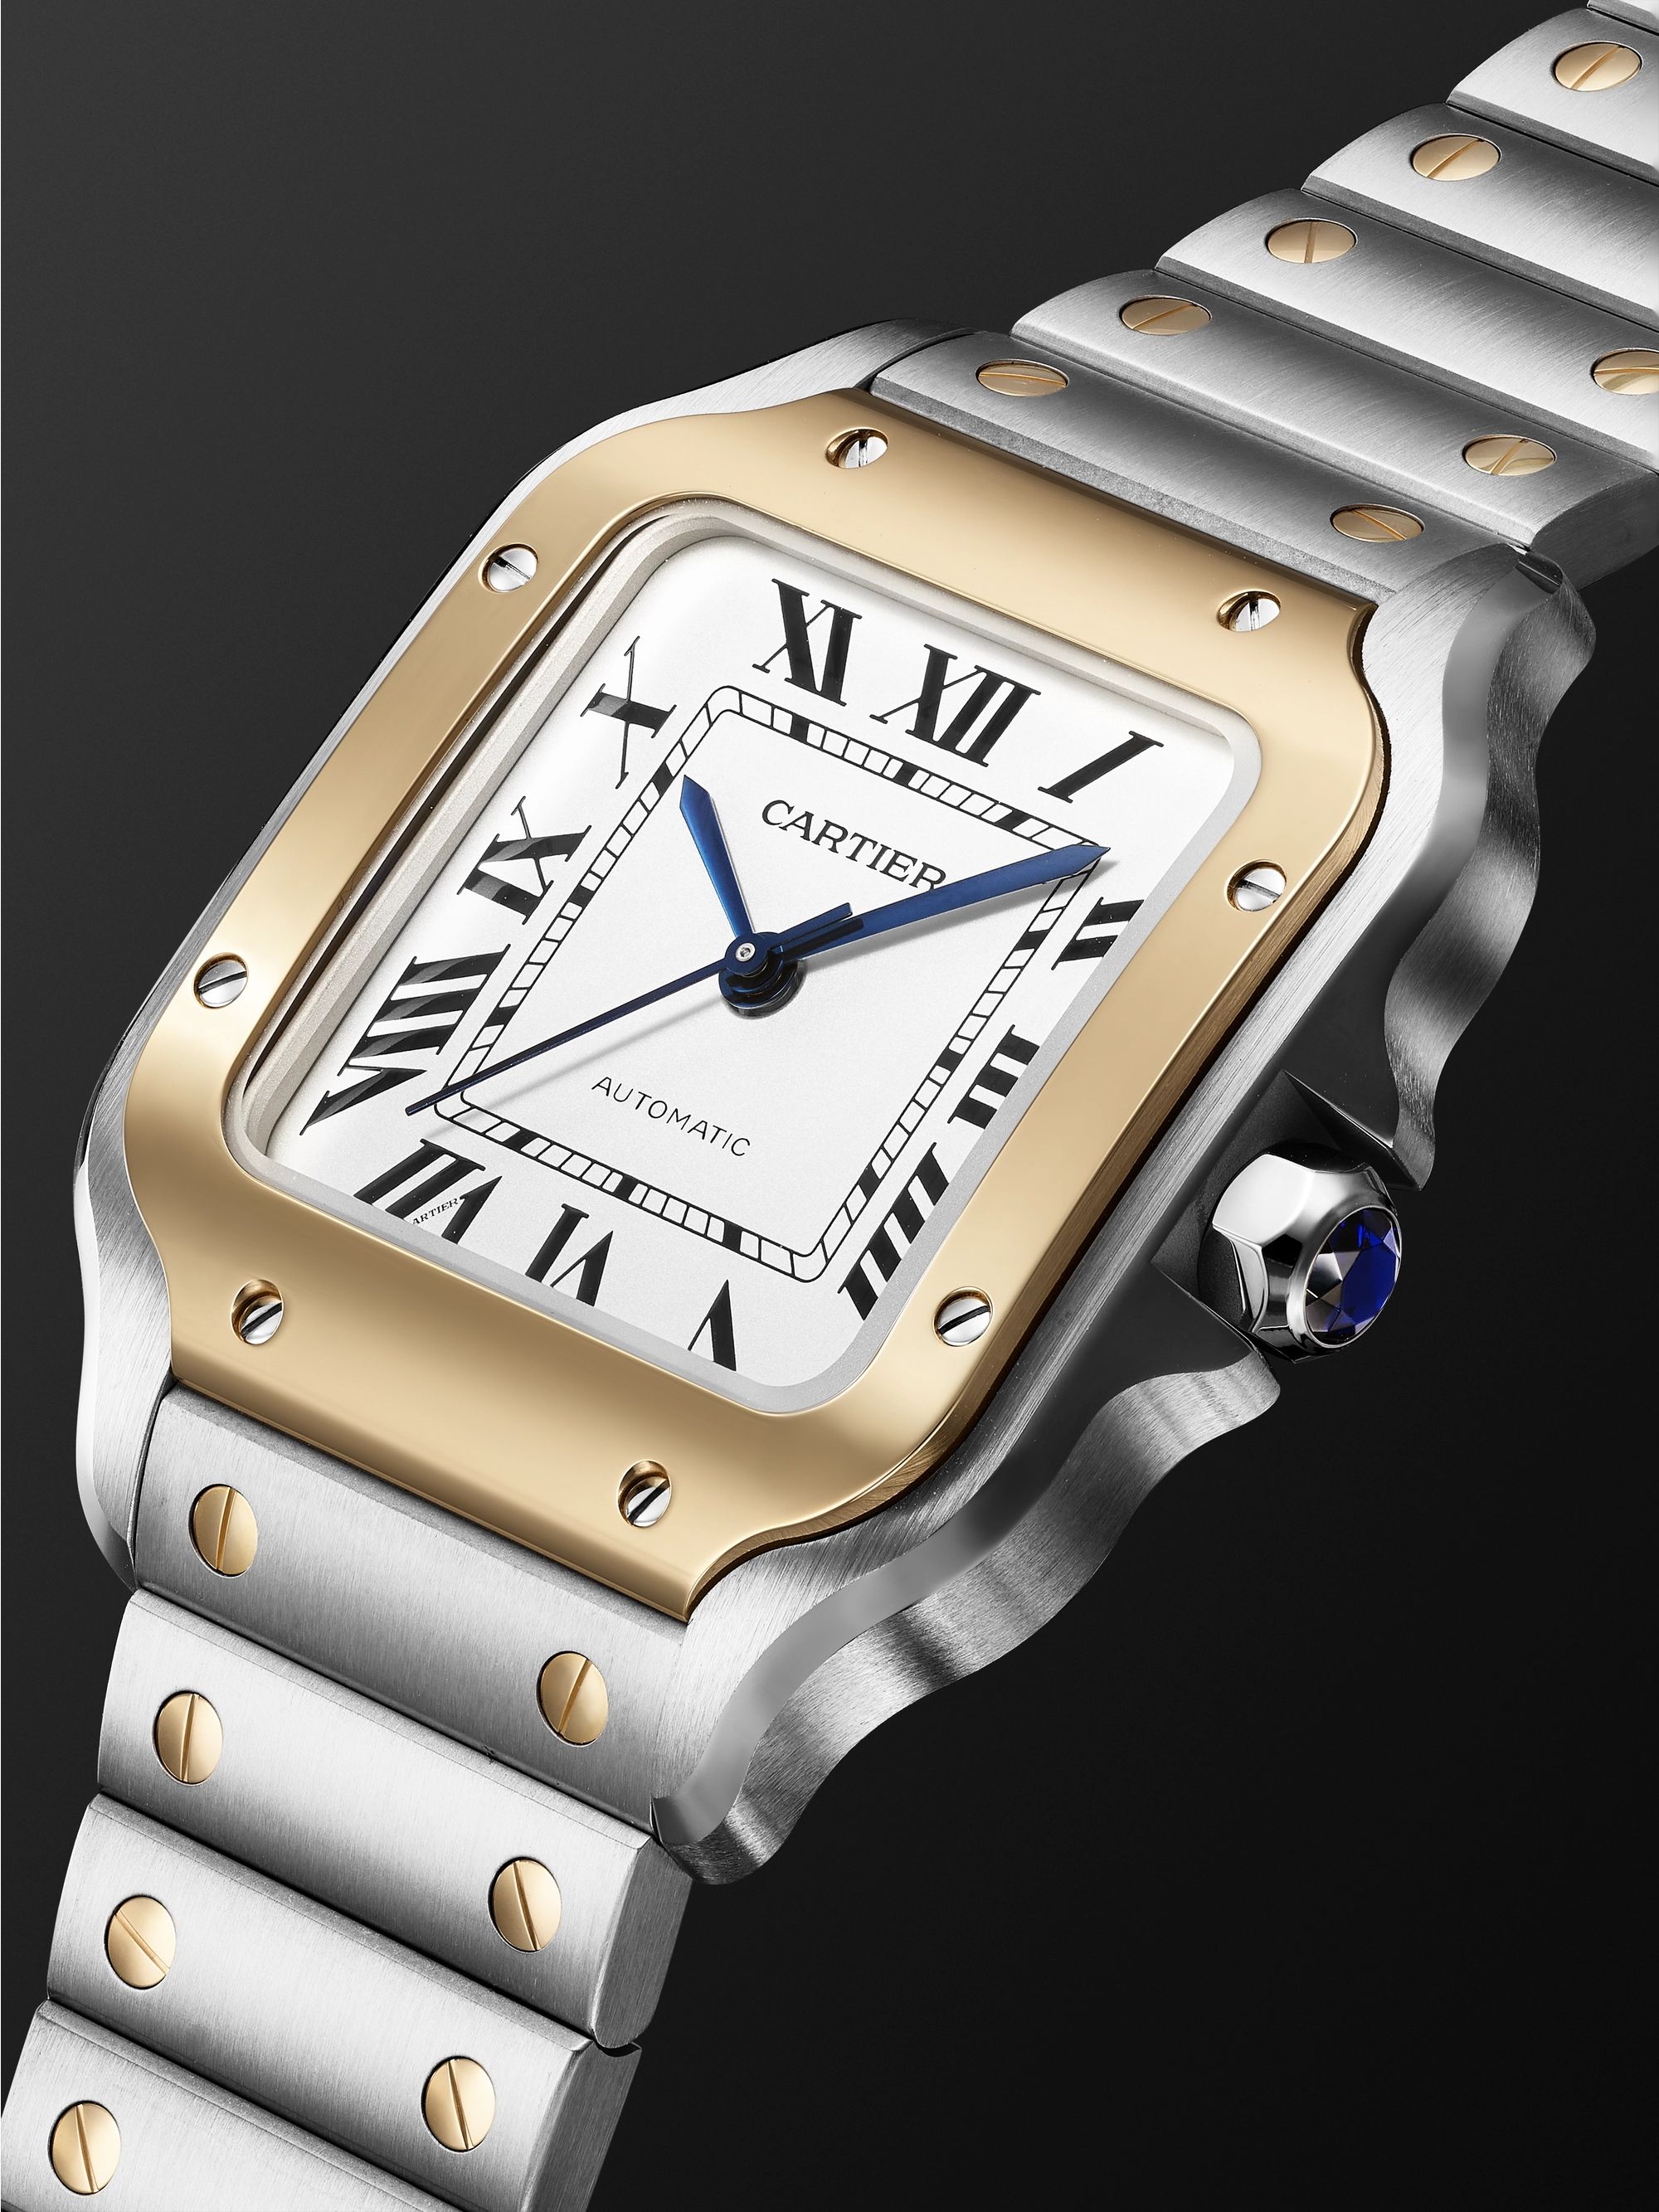 CARTIER Santos de Cartier Automatic 35.1mm Interchangeable 18-Karat Gold, Stainless Steel and Leather Watch, Ref. No. W2SA0016